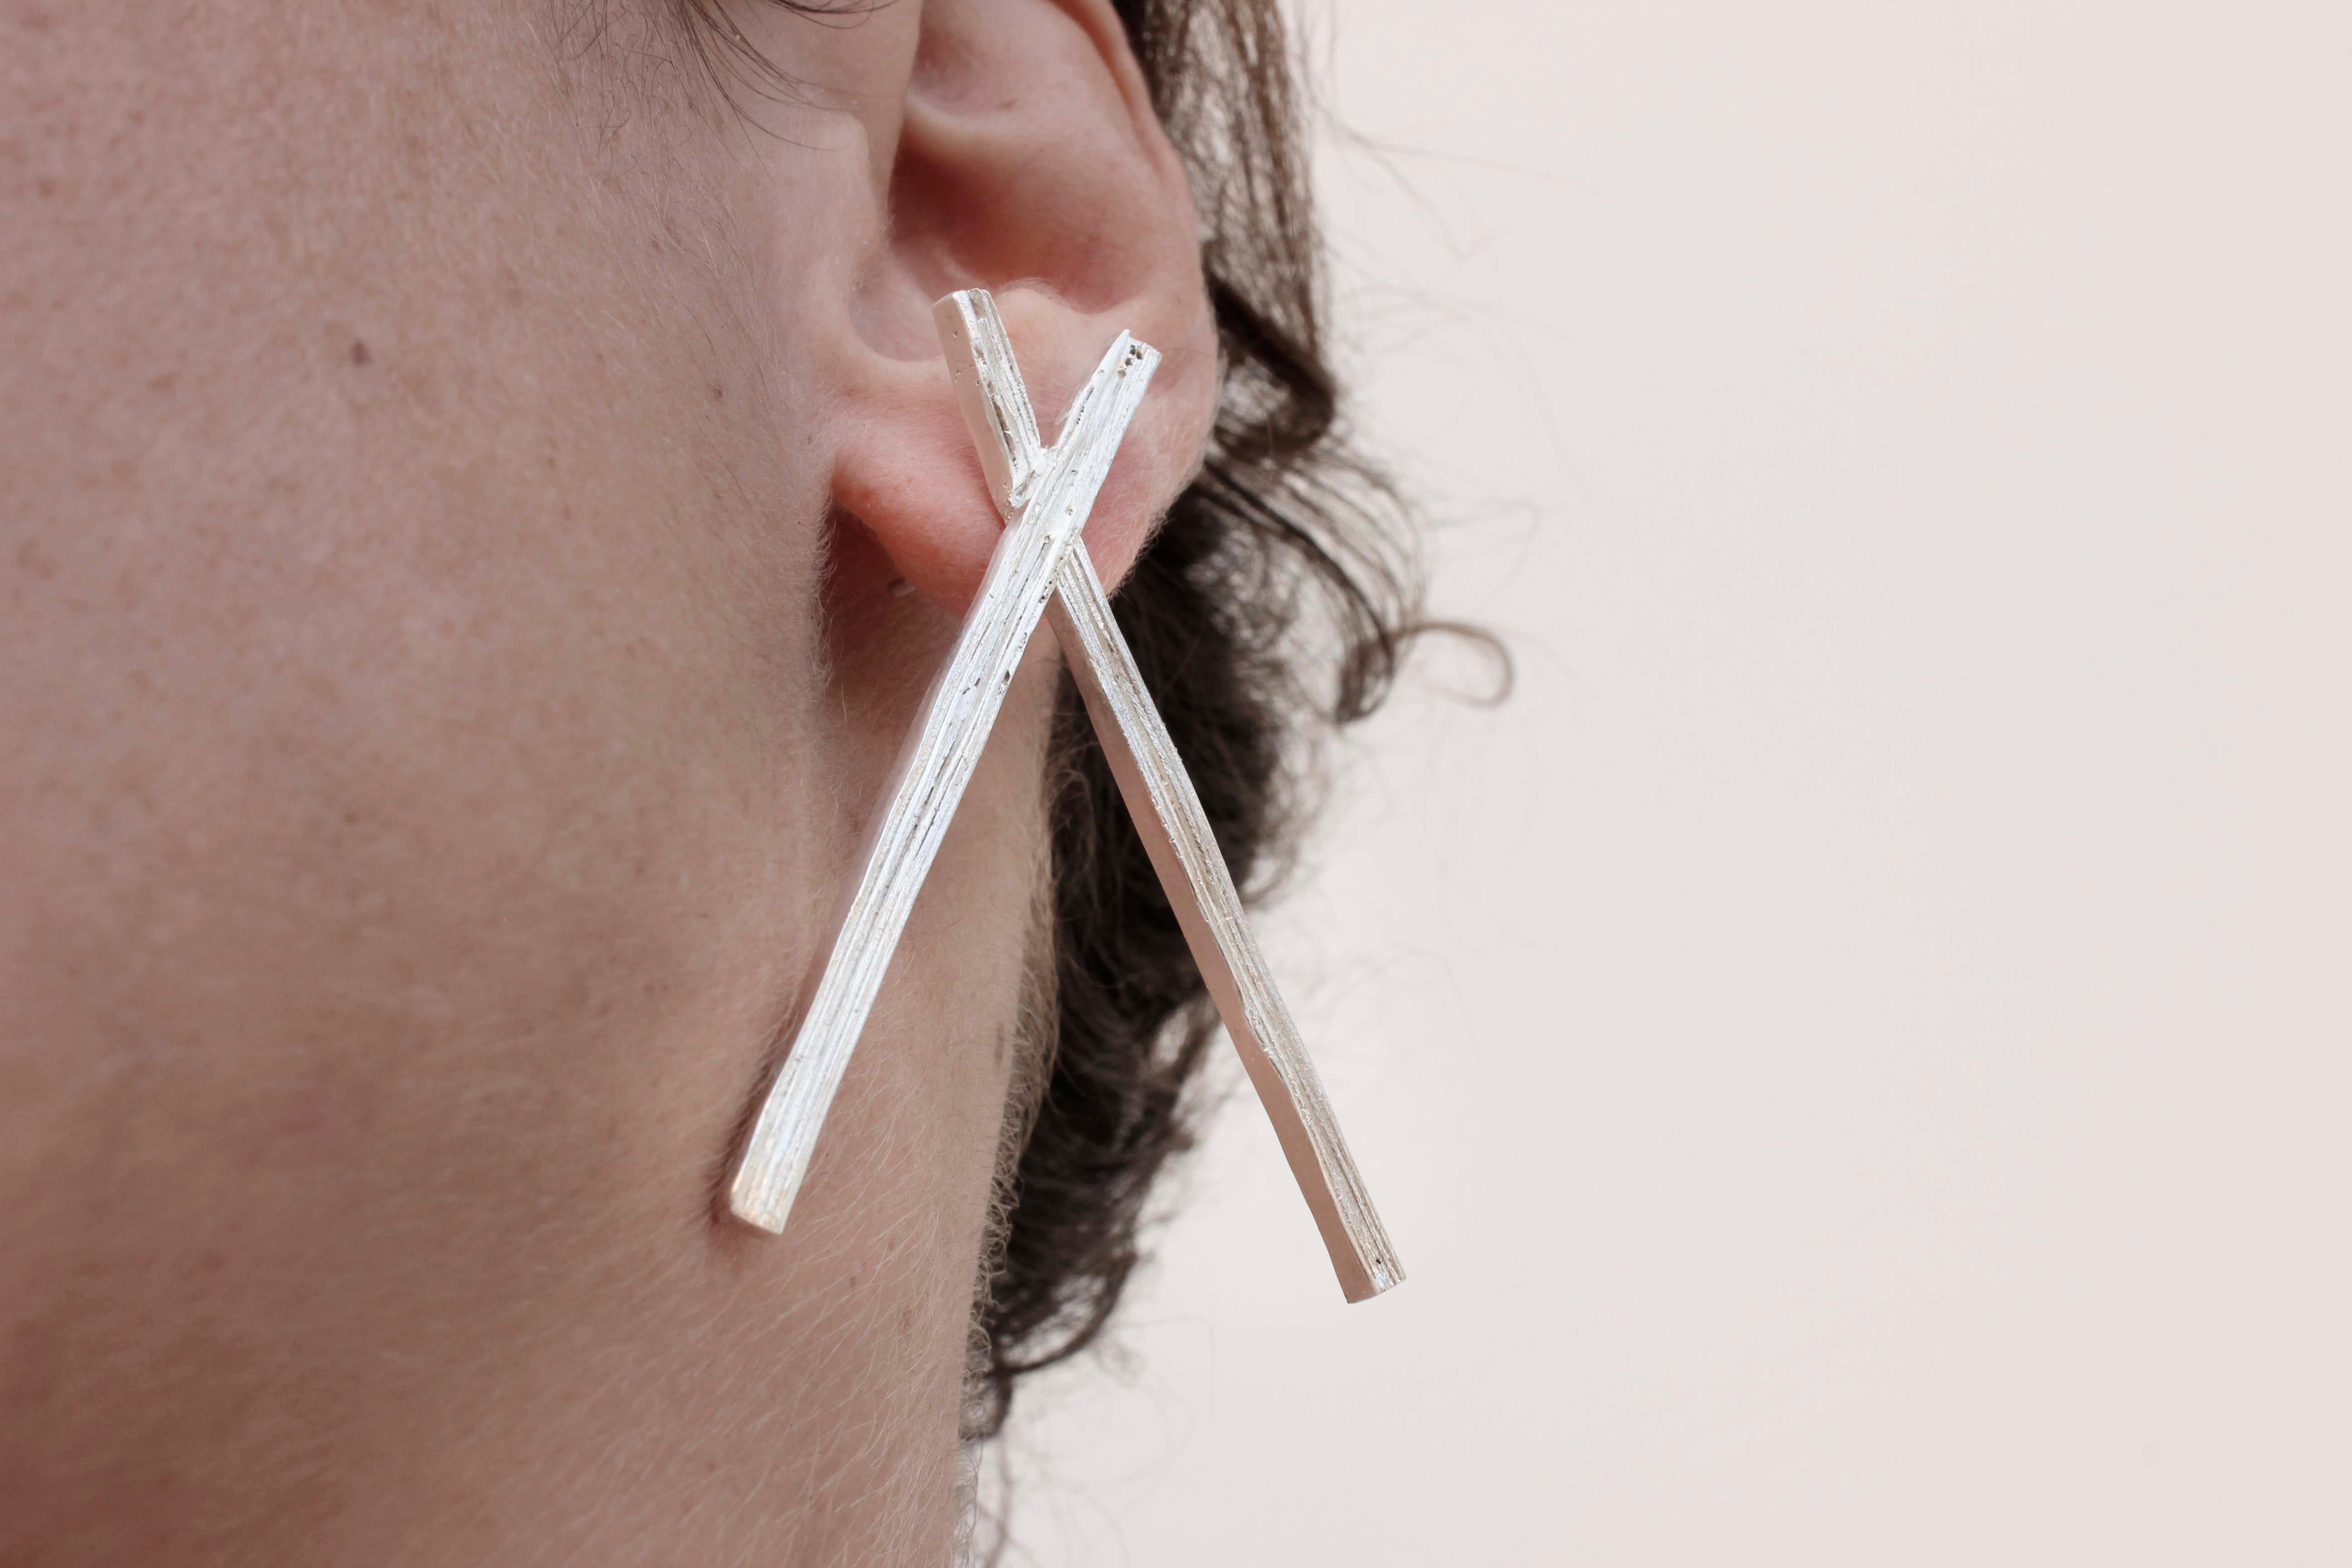 Made from eco silver sheets soldered together, in order to create this unique texture of layers.

The earrings are part of project_x. A collection inspired by the electronic music era.

Length: 5.5 Centimetres

Width: 4 Centimetres